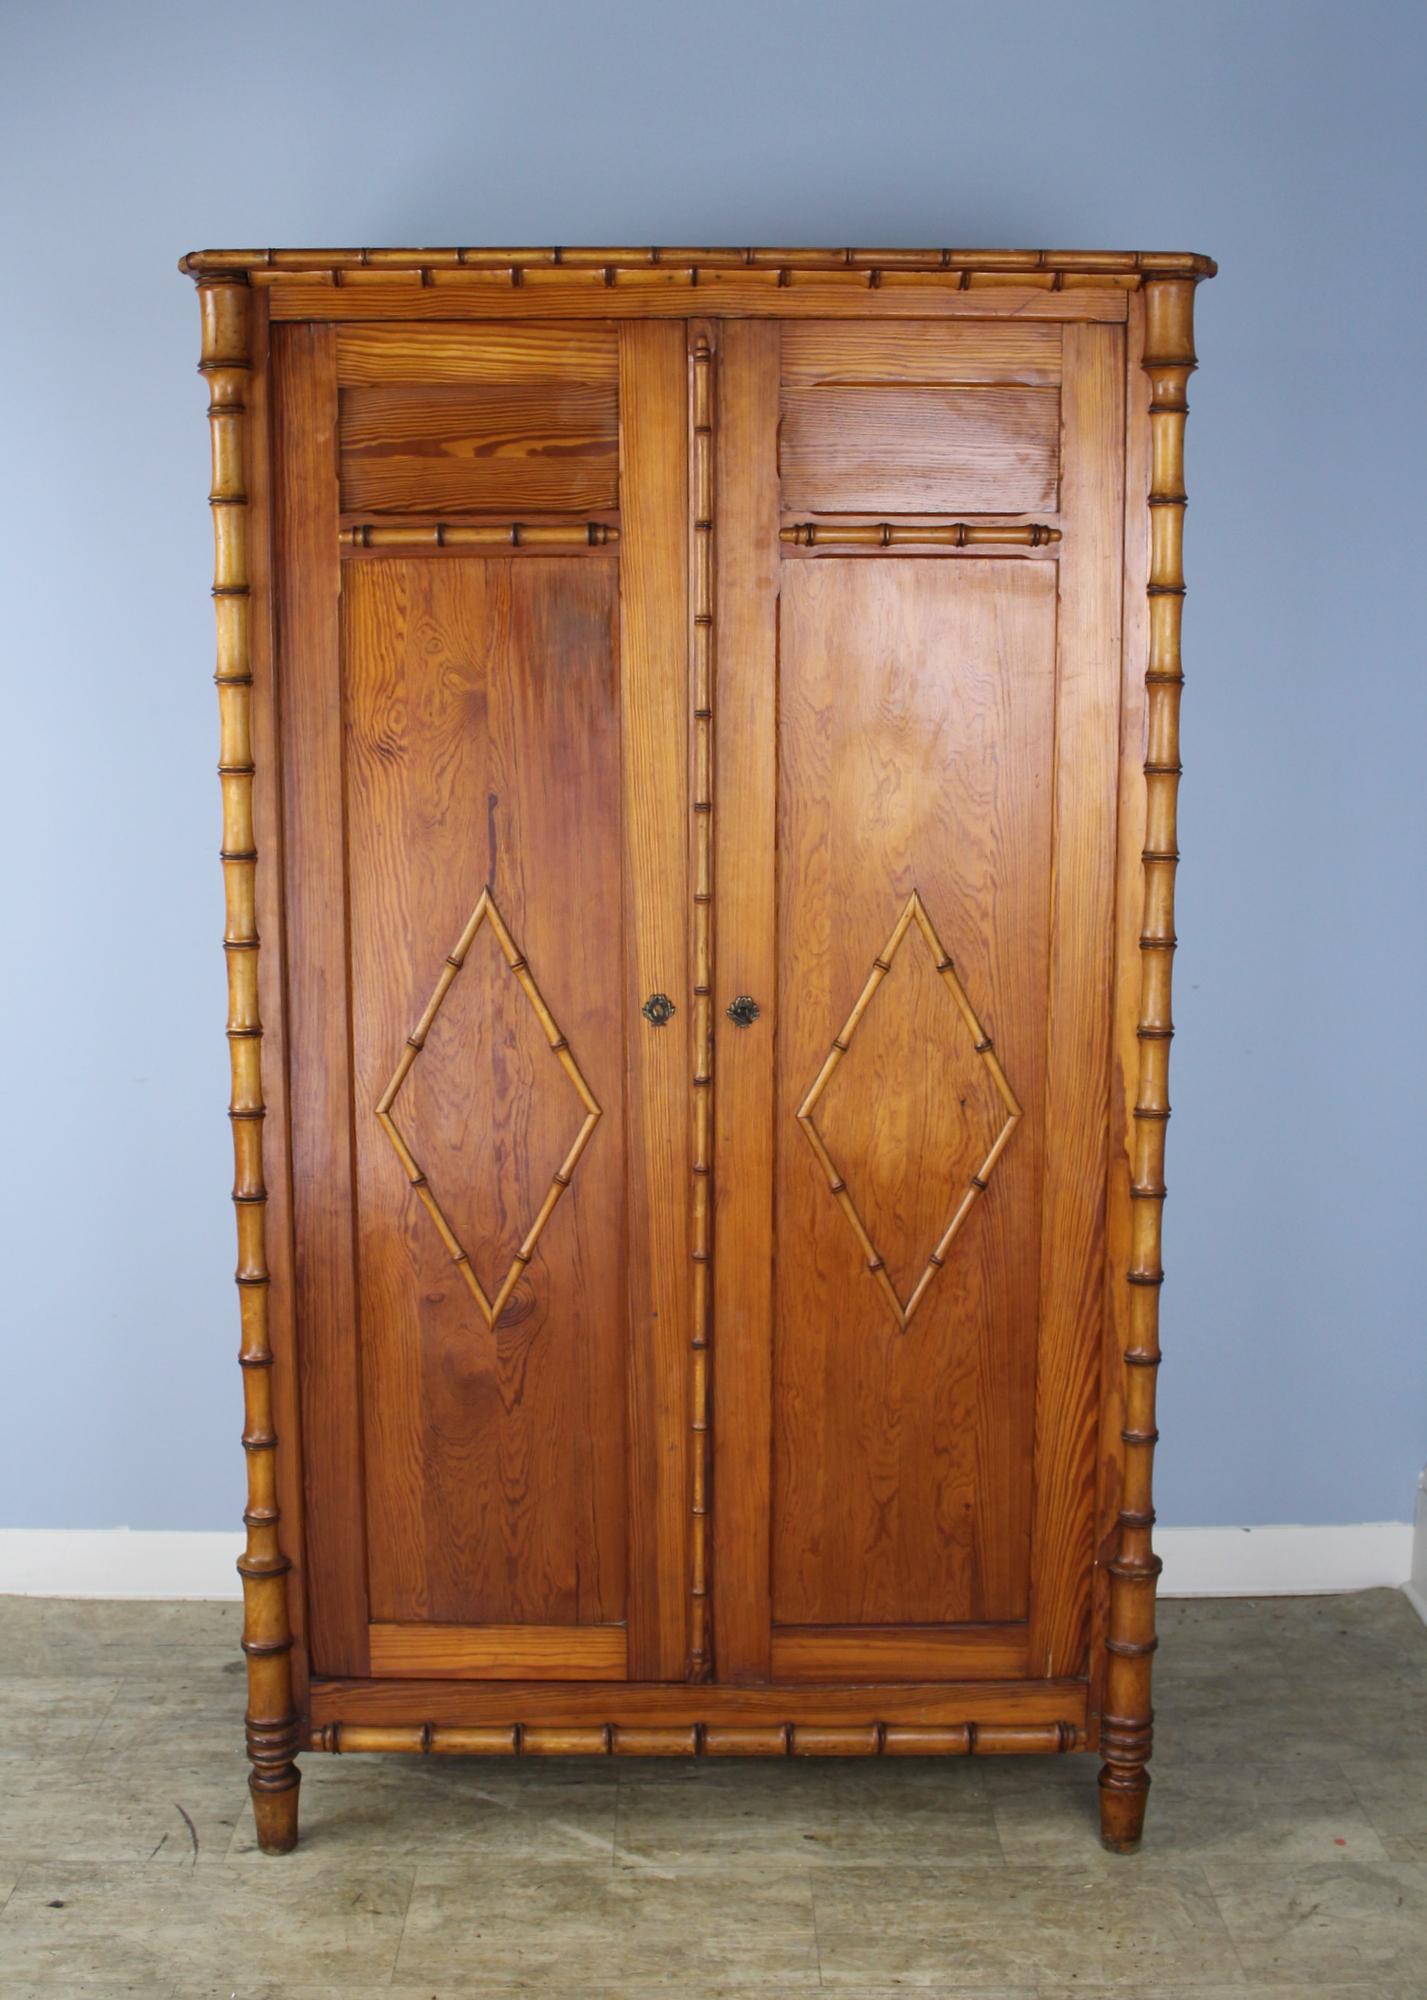 A small honey colored faux bamboo food cupboard or armoire from France. The piece boasts three shelves, removable but not adjustable, and already equipped to accommodate a clothes hanging rod.. The cornice and door features beautifully fashioned